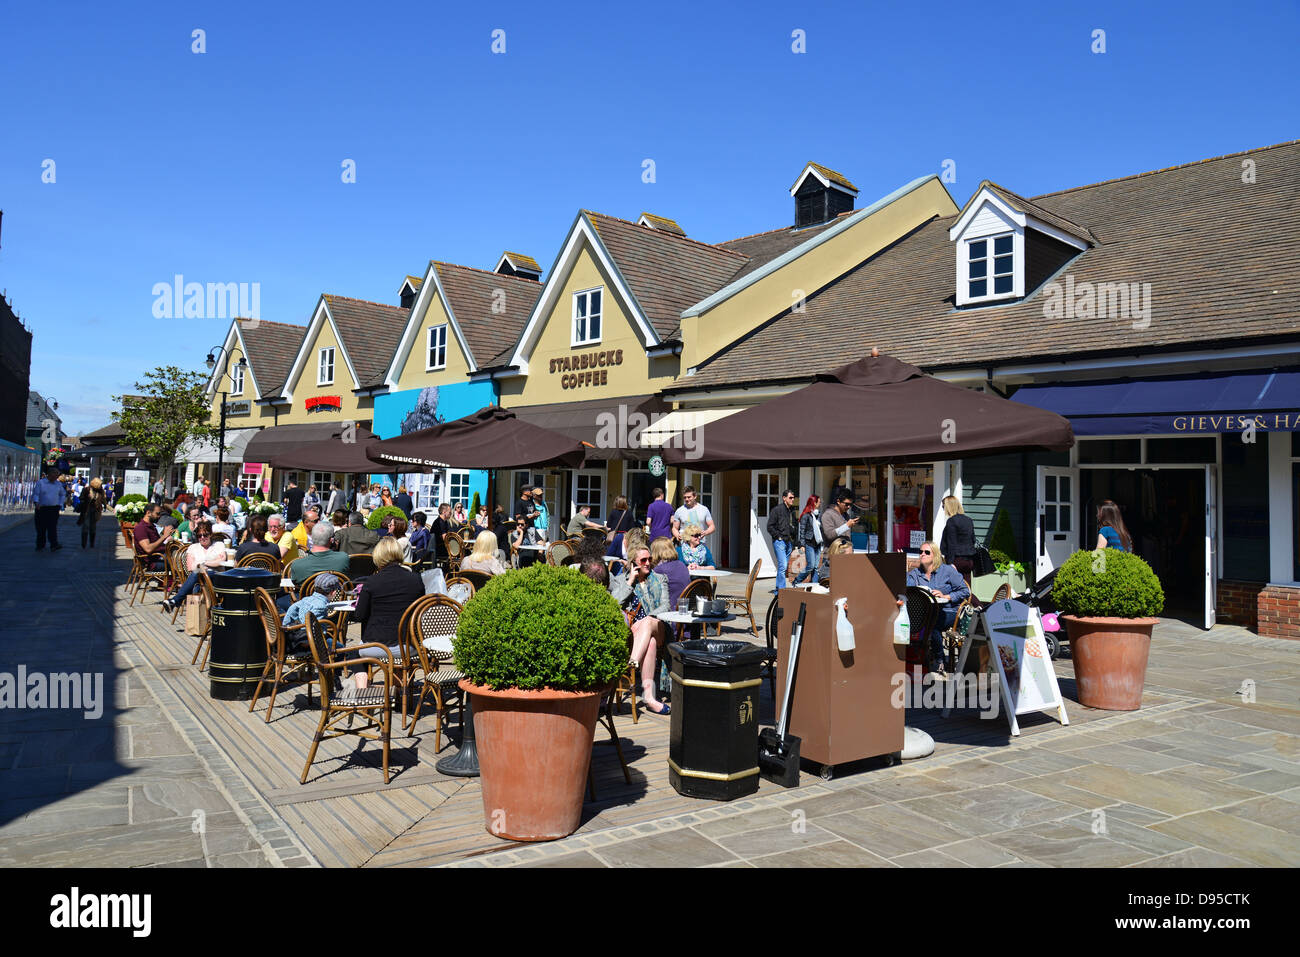 Starbucks Coffee shop, Bicester Village Outlet Shopping Centre ...